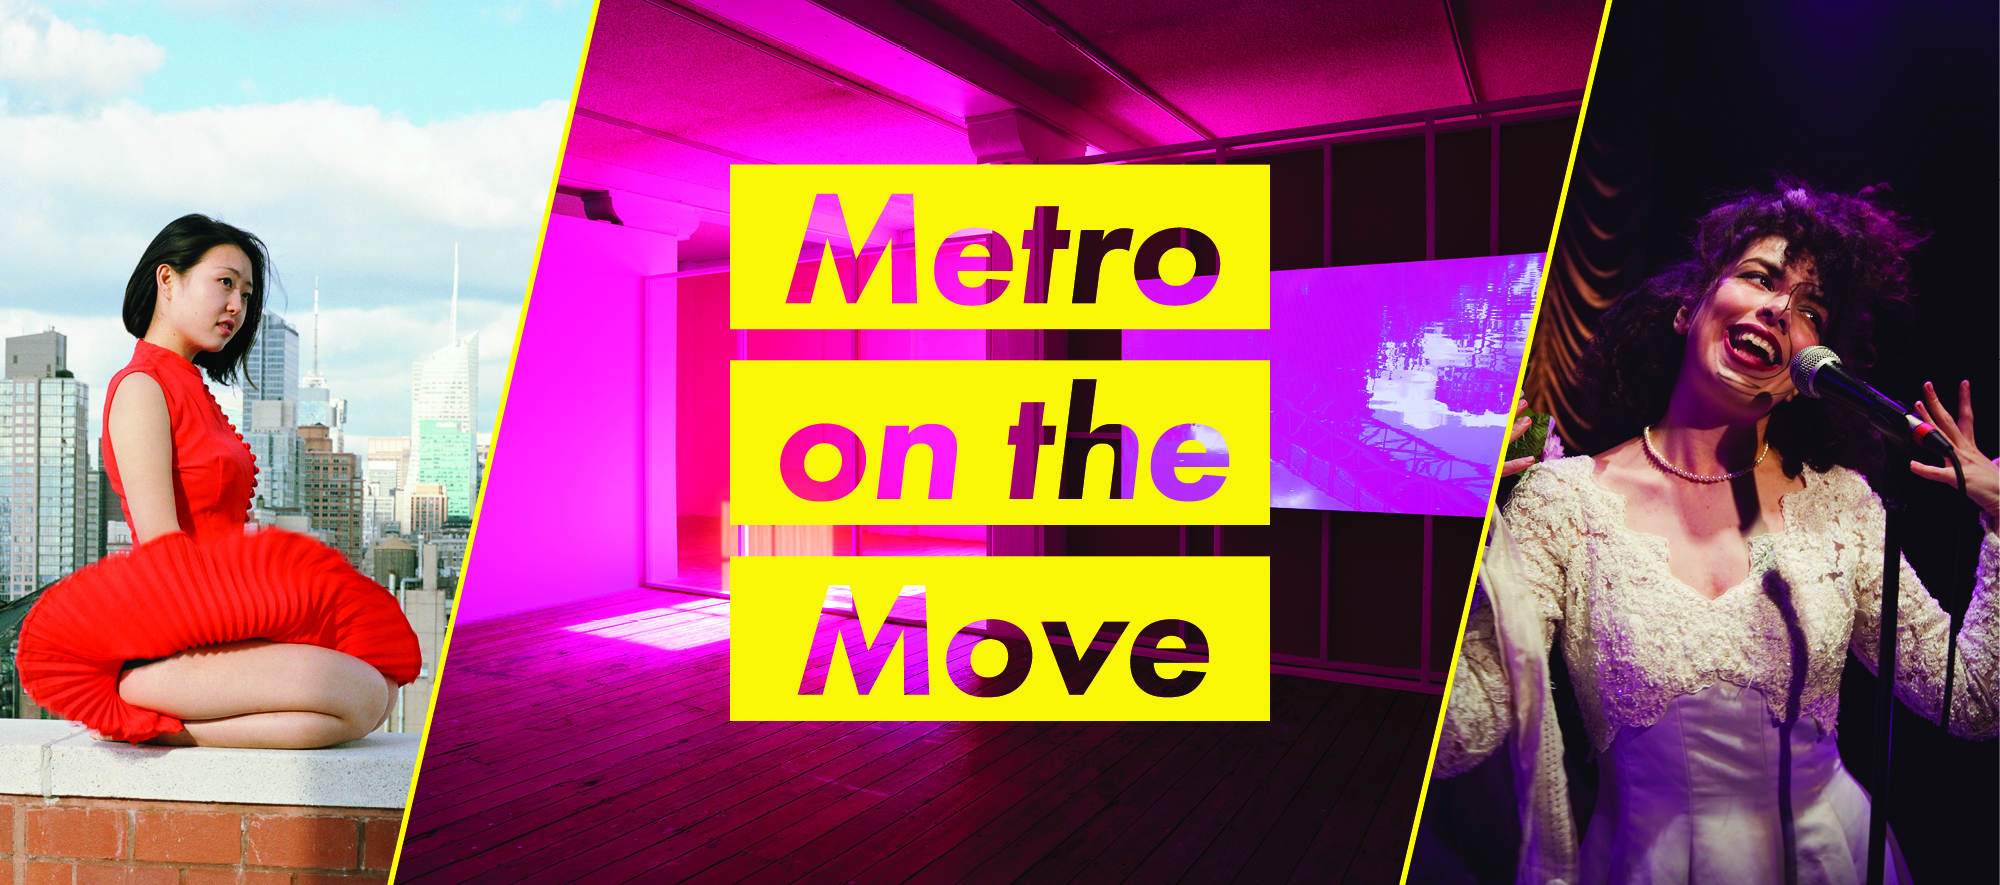 Brisbane’s Metro Arts planning move as part of 40th celebrations